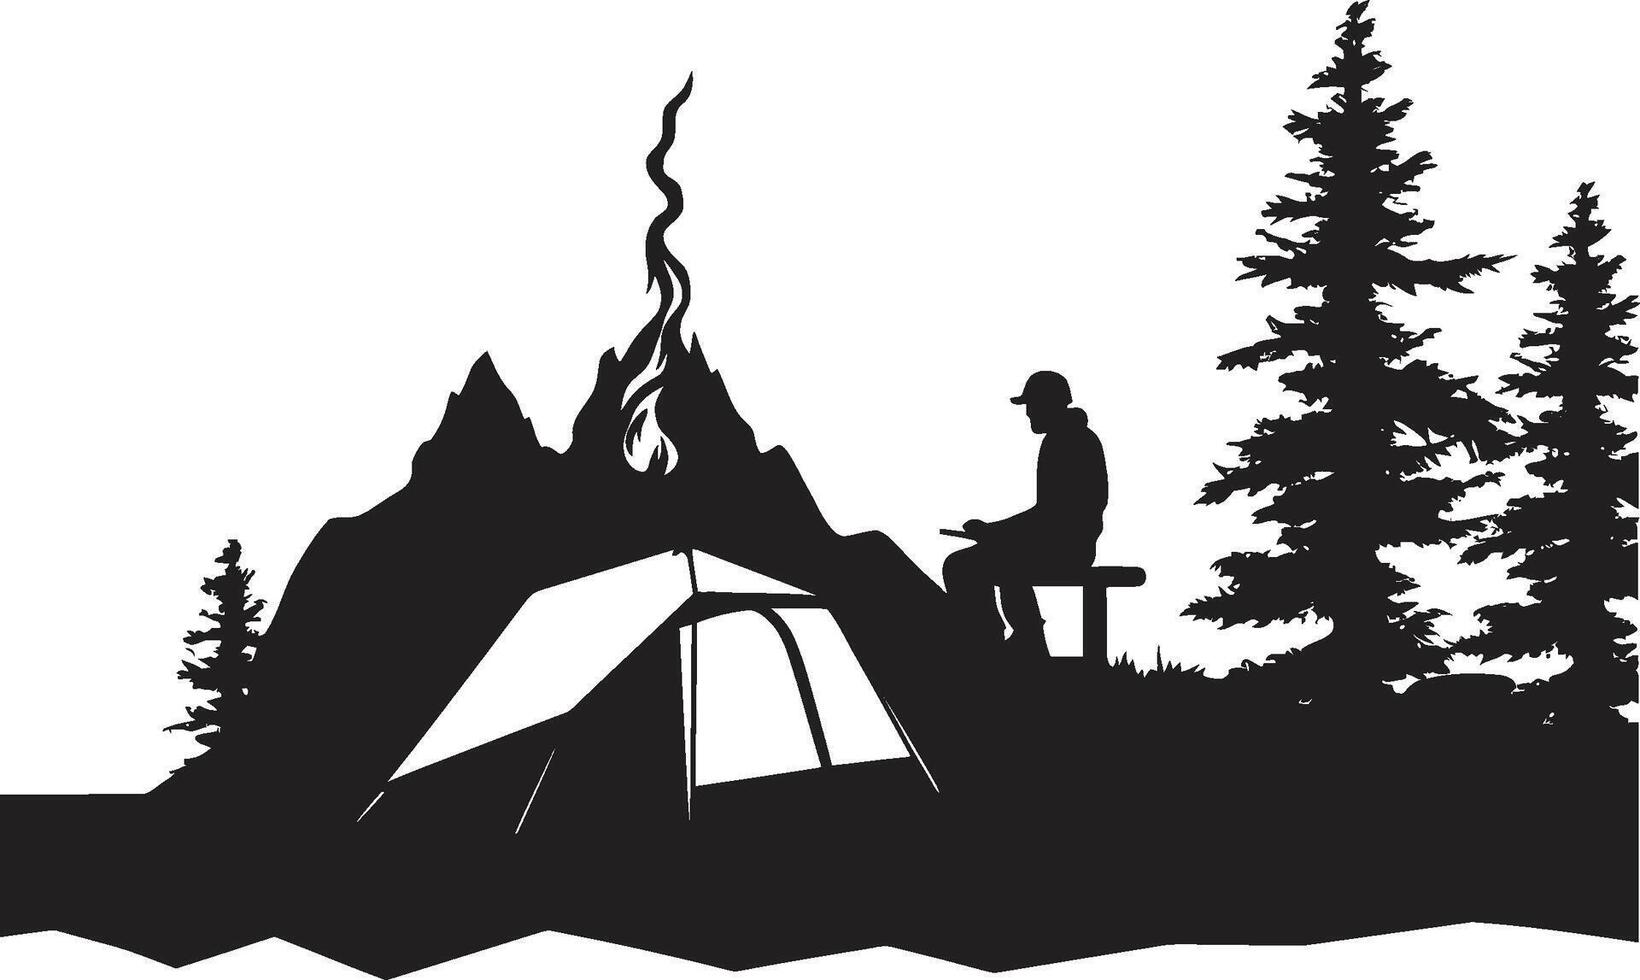 Into the Woods Elegant Black Icon with Vector Logo for Camping Campfire Chronicles Sleek Monochromatic Emblem for Outdoor Adventures